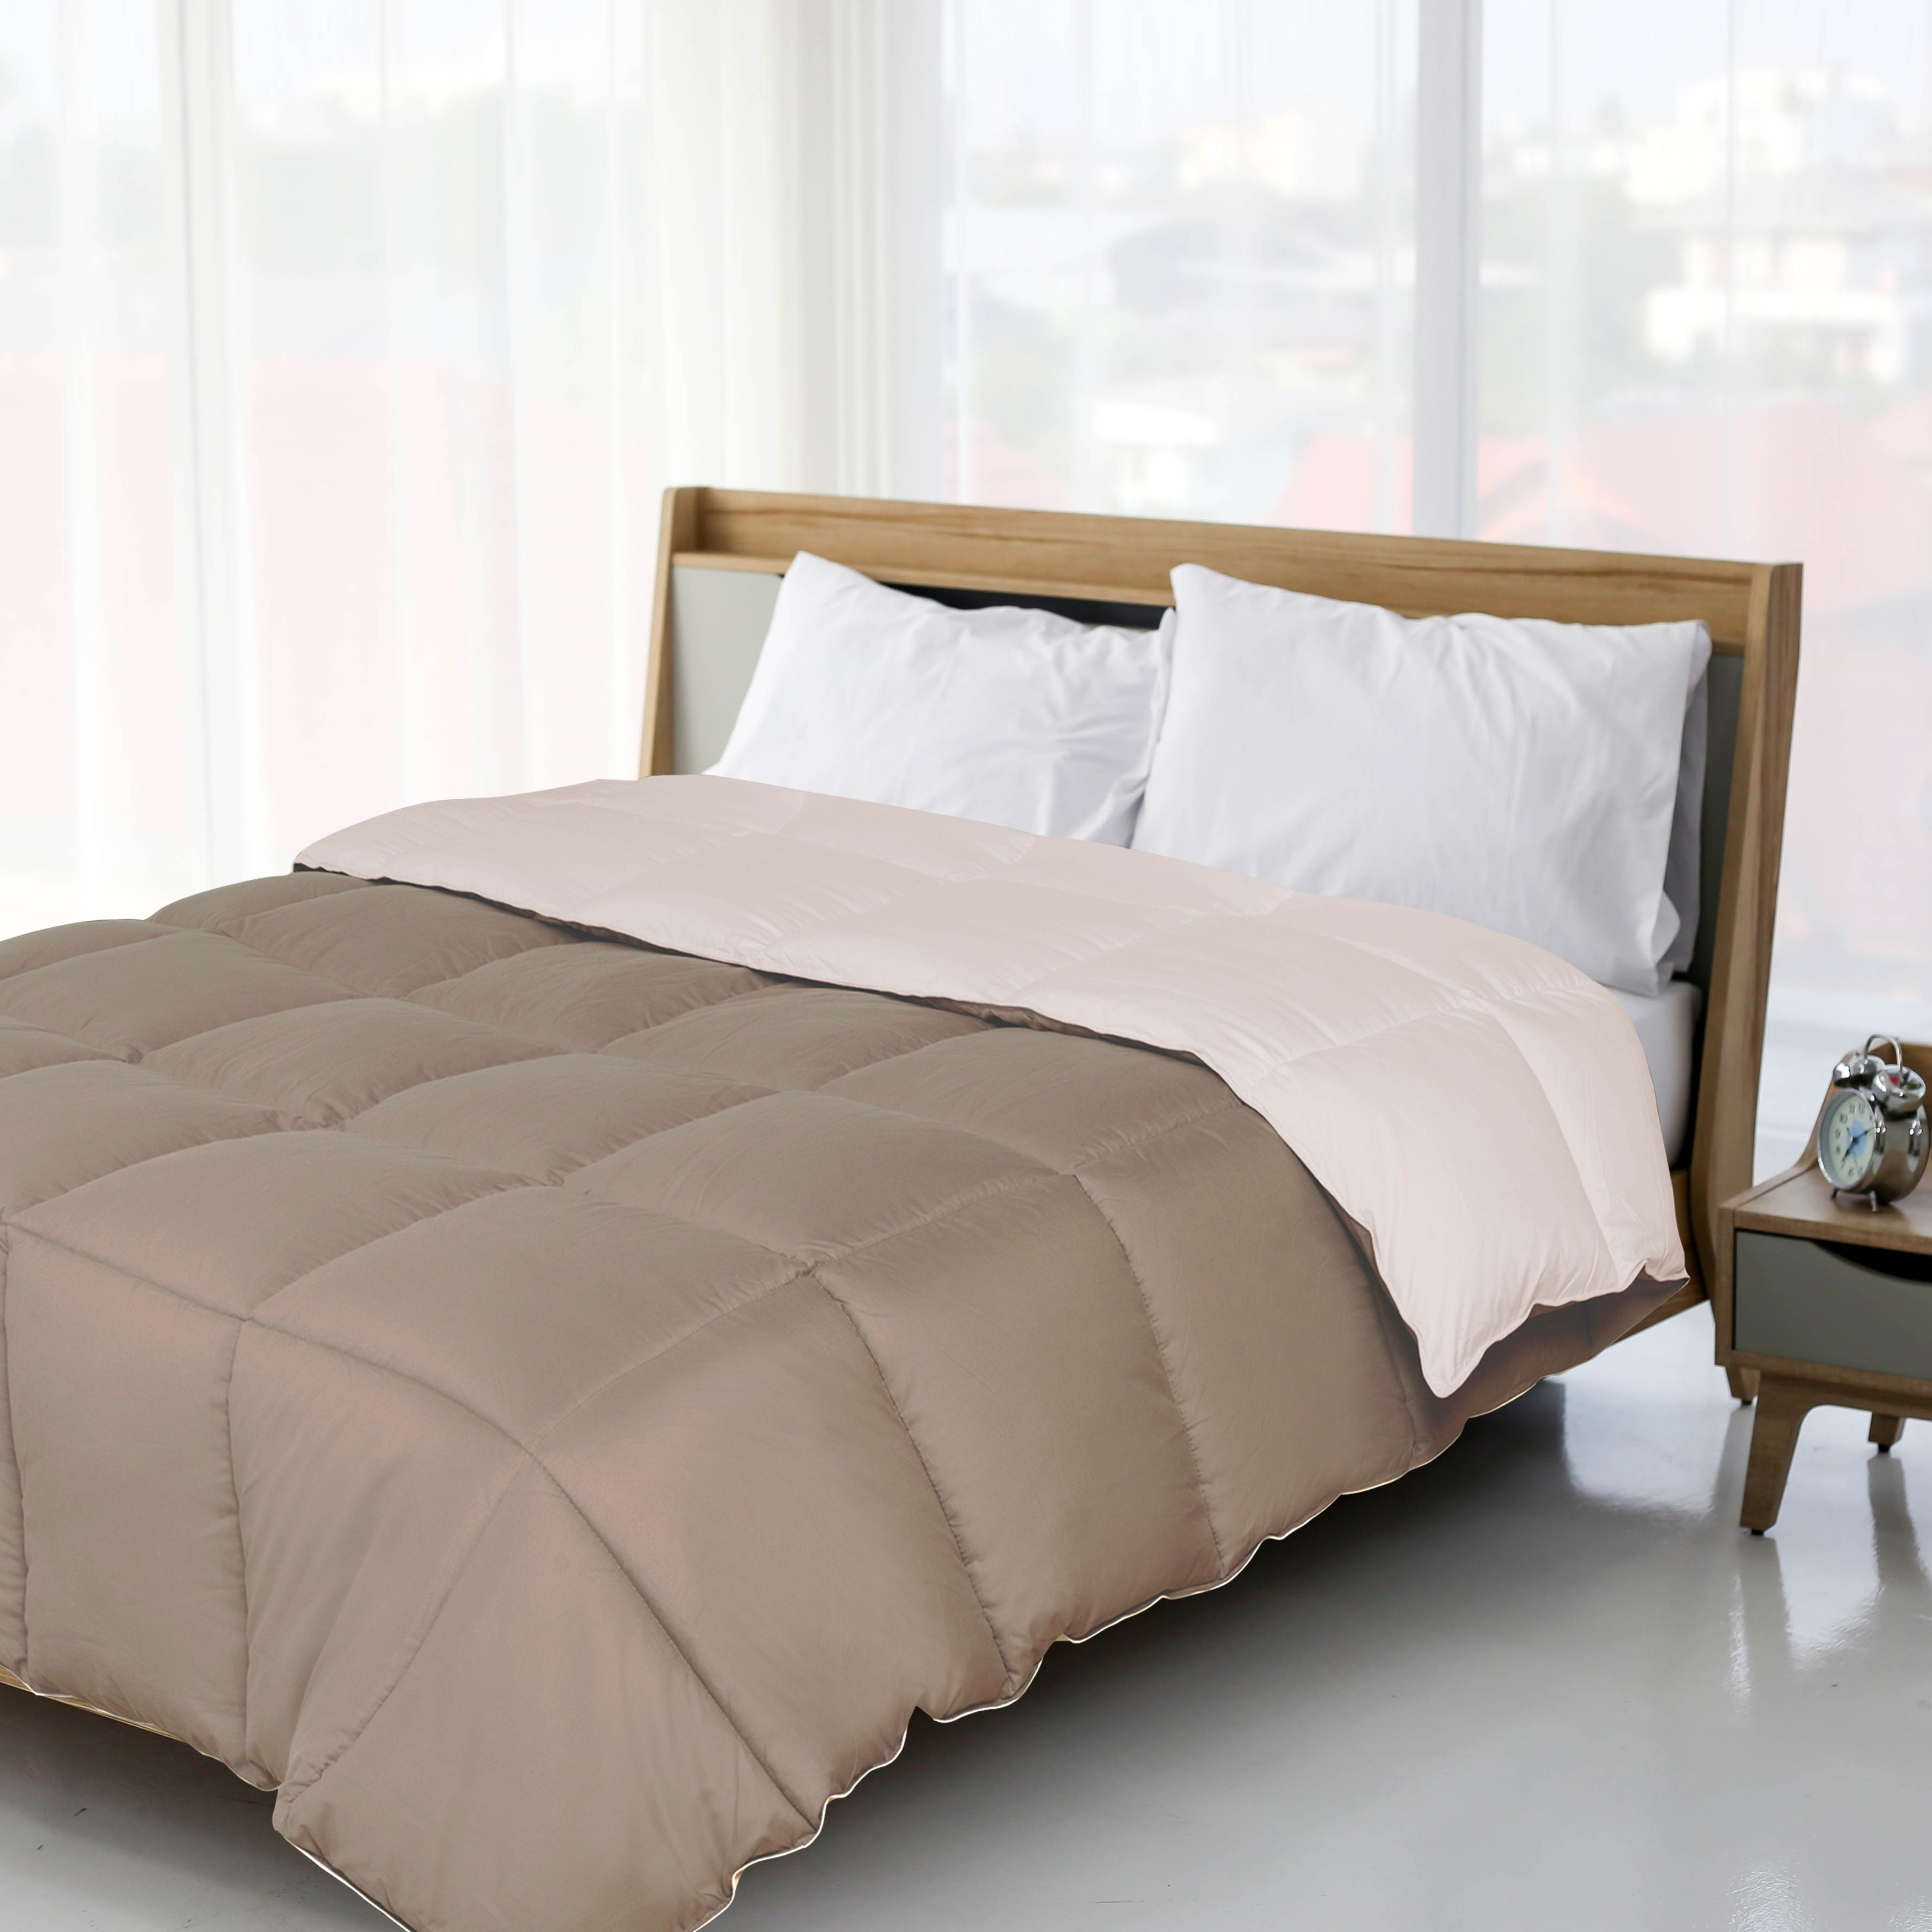 Superior Down Alternative Reversible Comforter, Twin/ Twin XL, Ivory/ Taupe - image 2 of 3